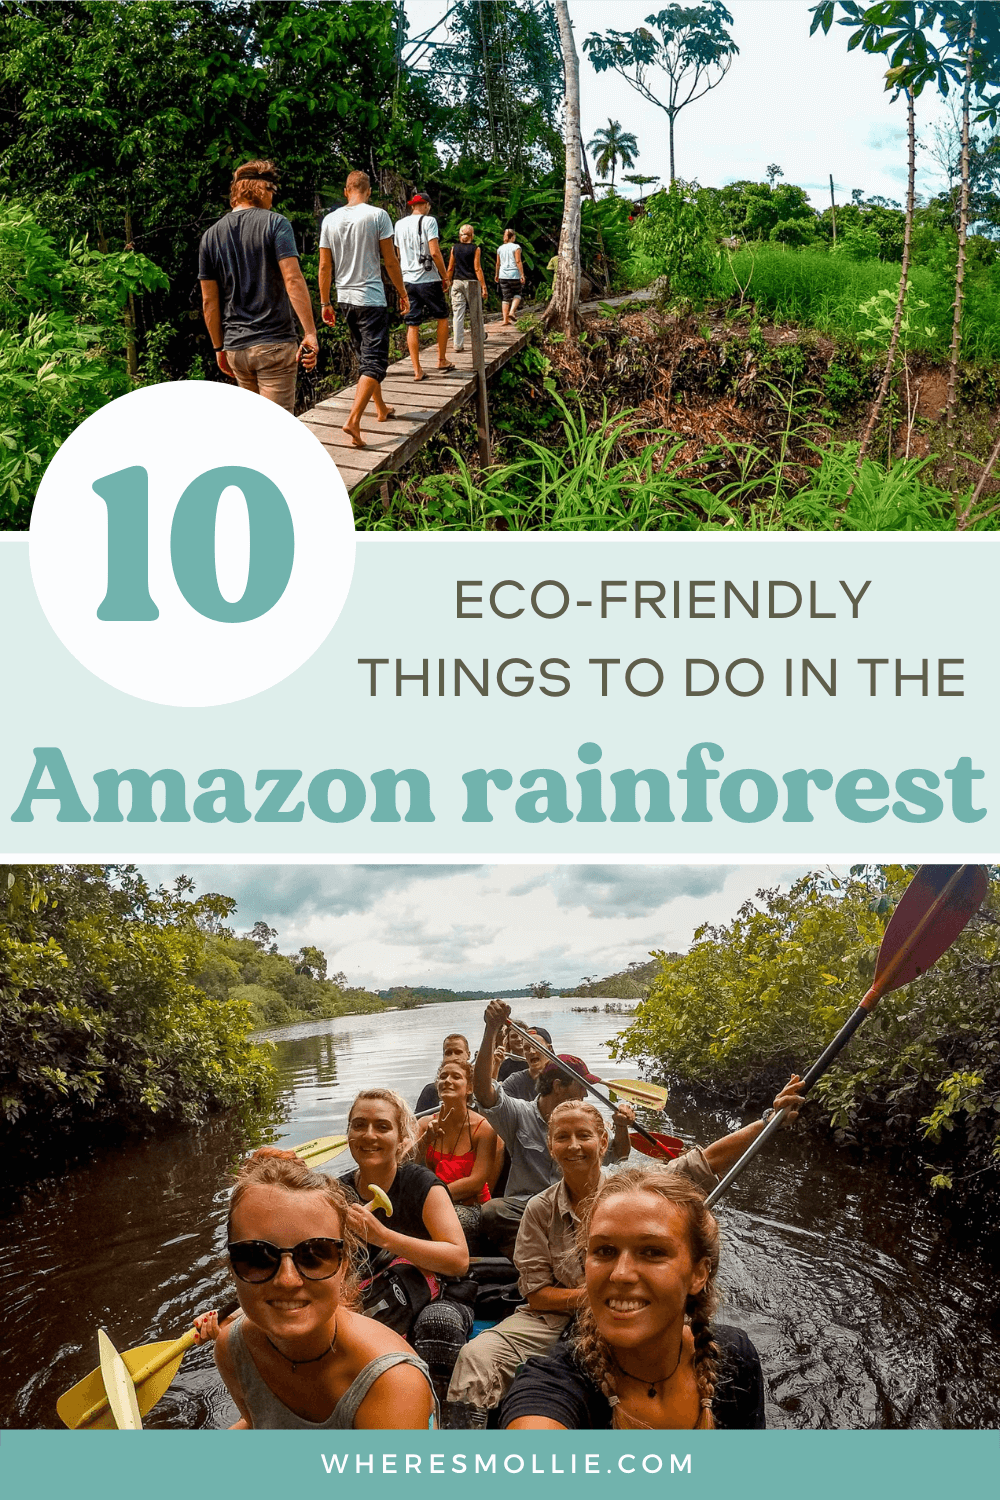 An eco-friendly guide to visiting the Amazon rainforest